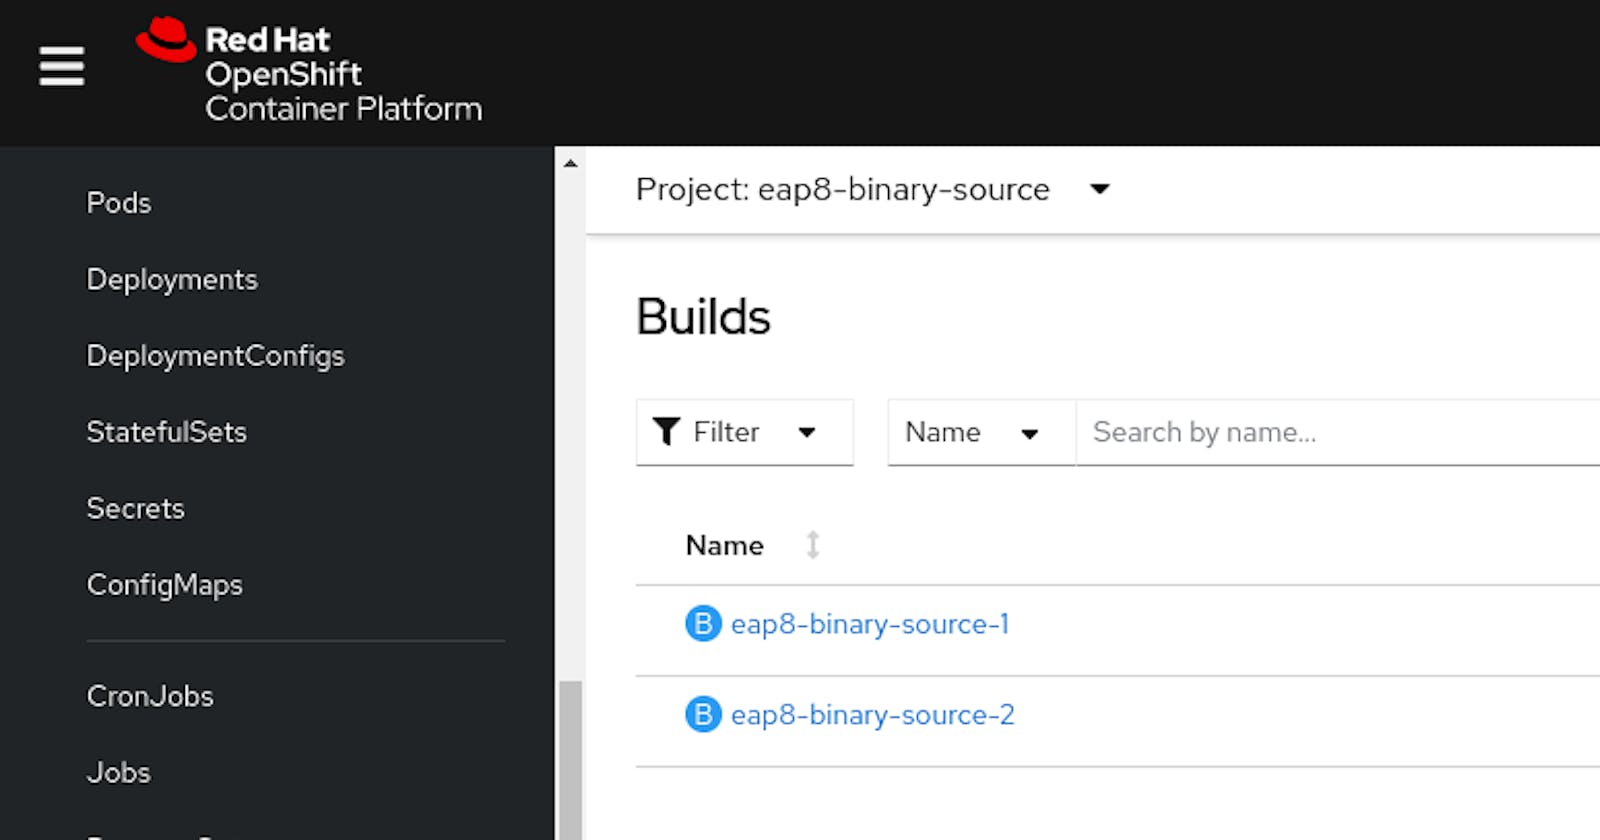 Deploy a WildFly Jakarta EE 10 application on OpenShift